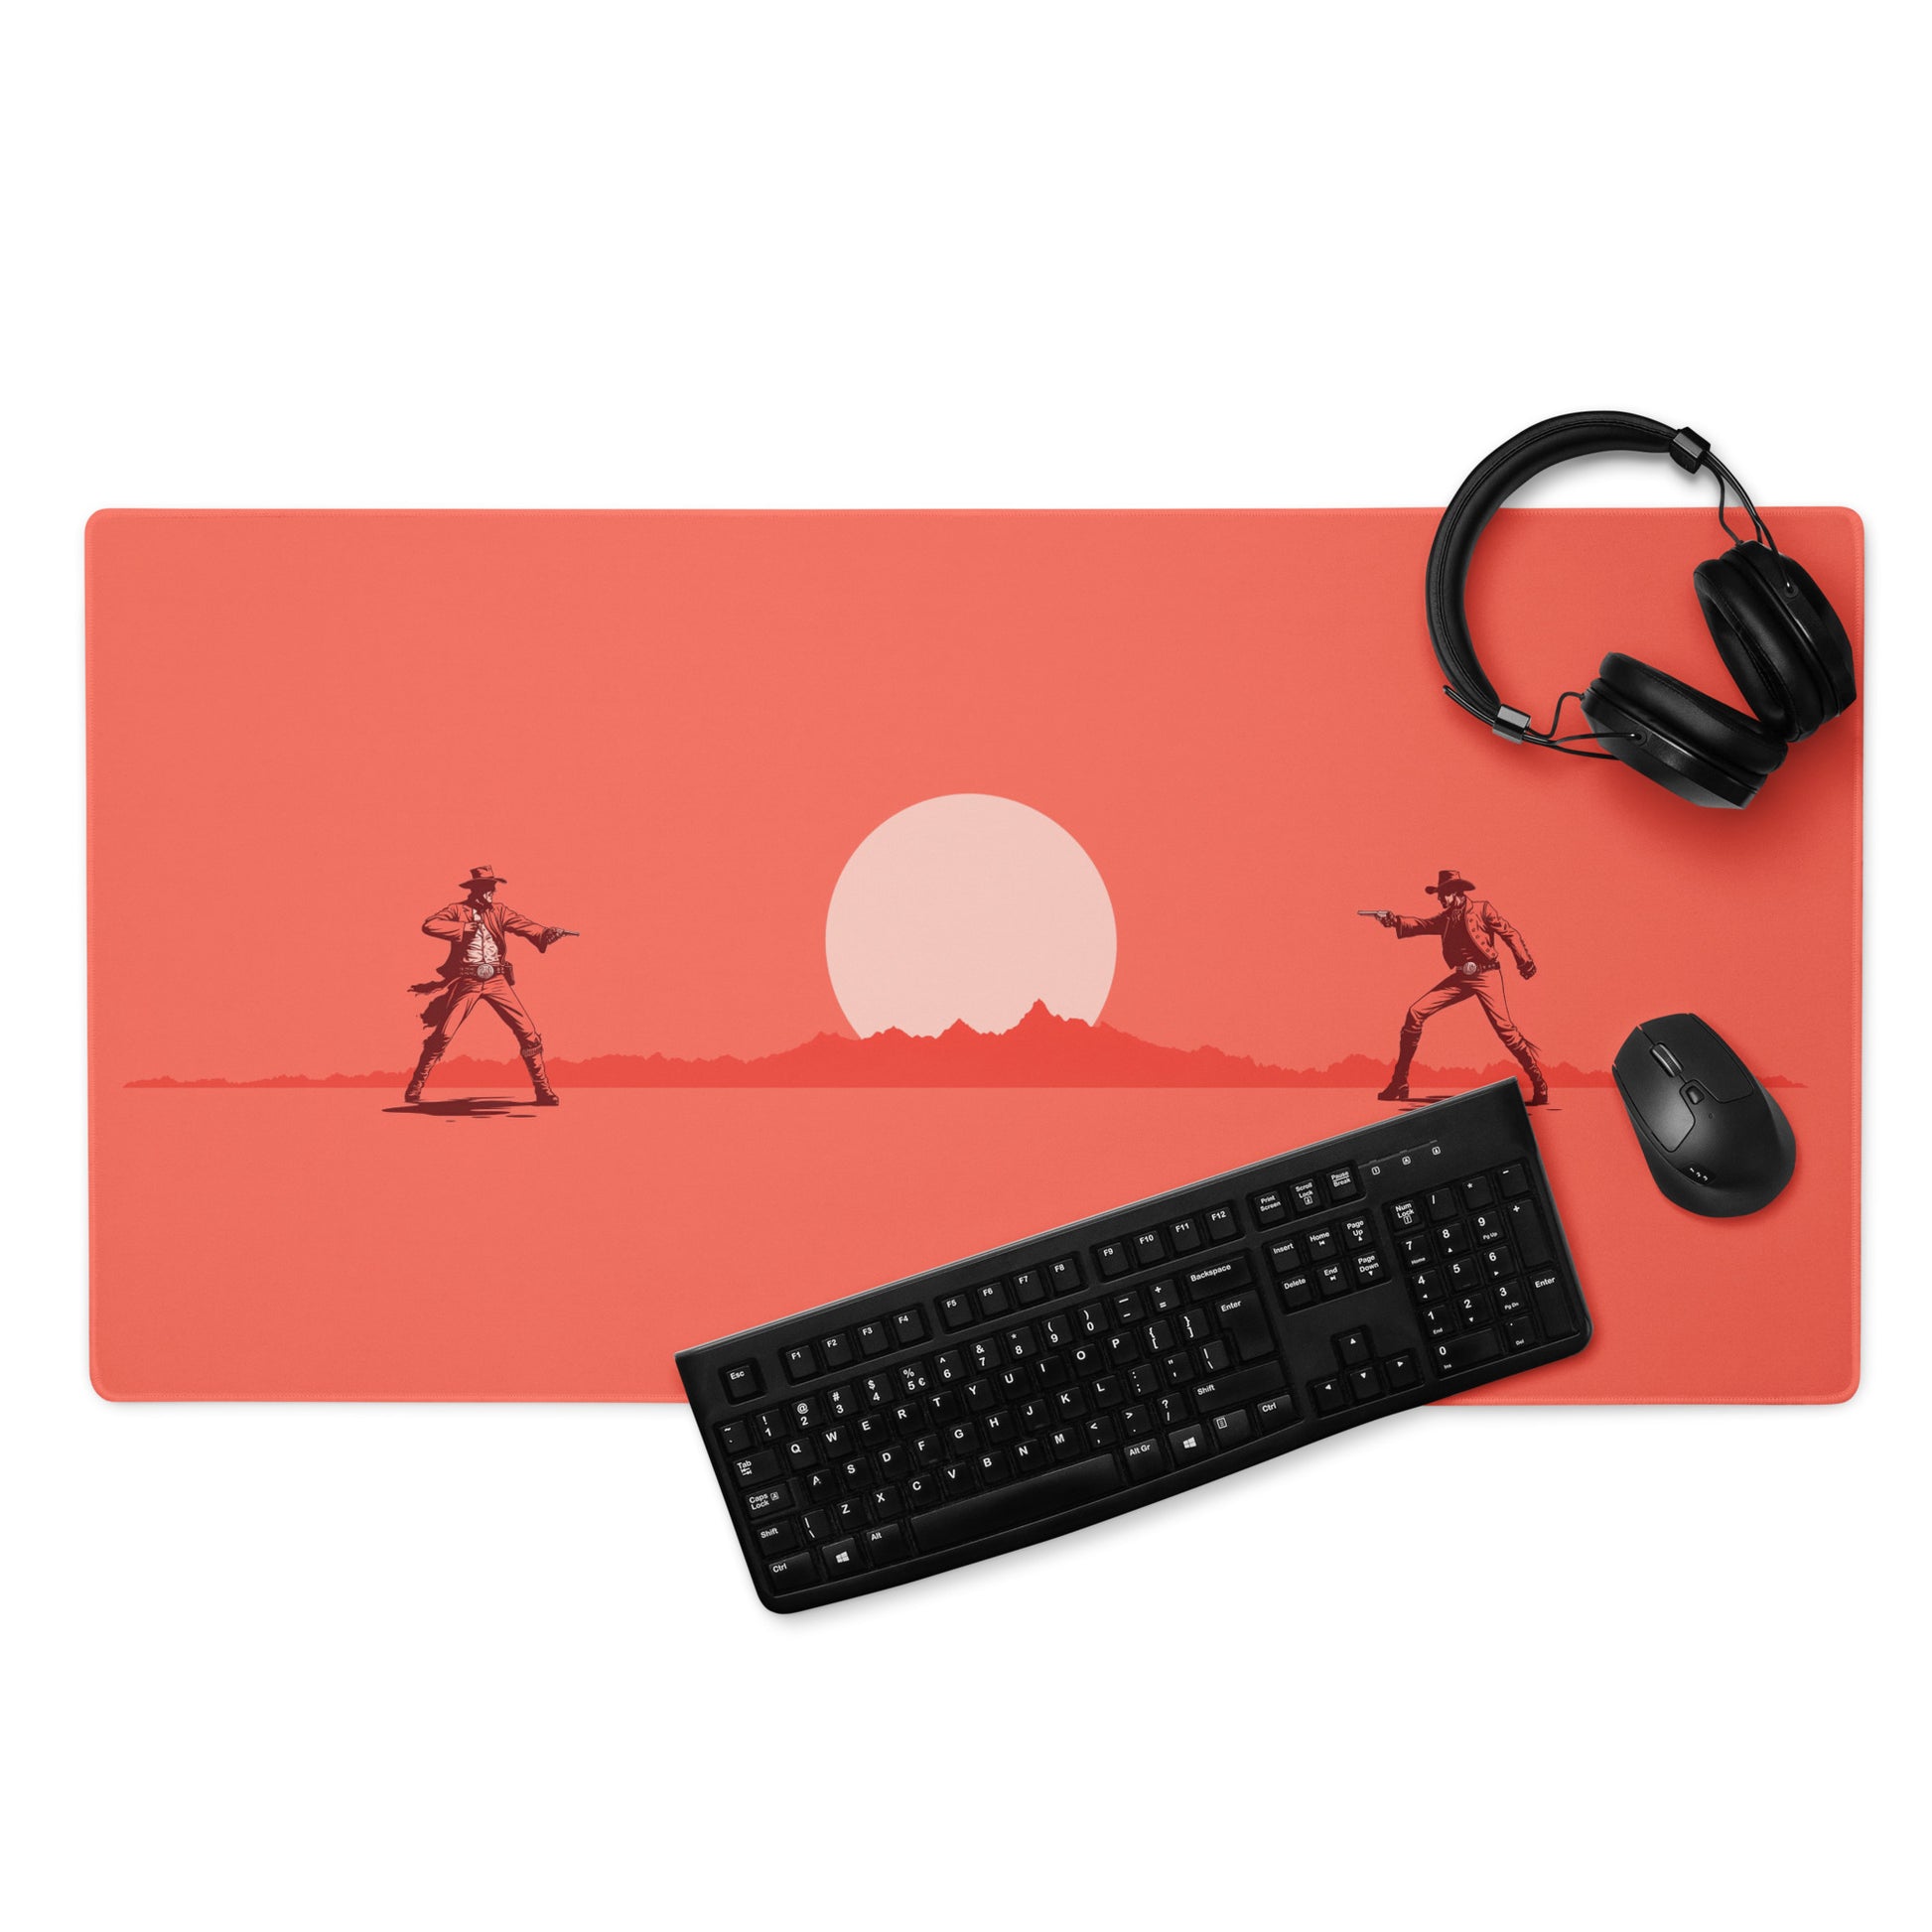 A Red 36" x 18" desk pad with cowboys dueling. With a keyboard, mouse, and headphones sitting on it.